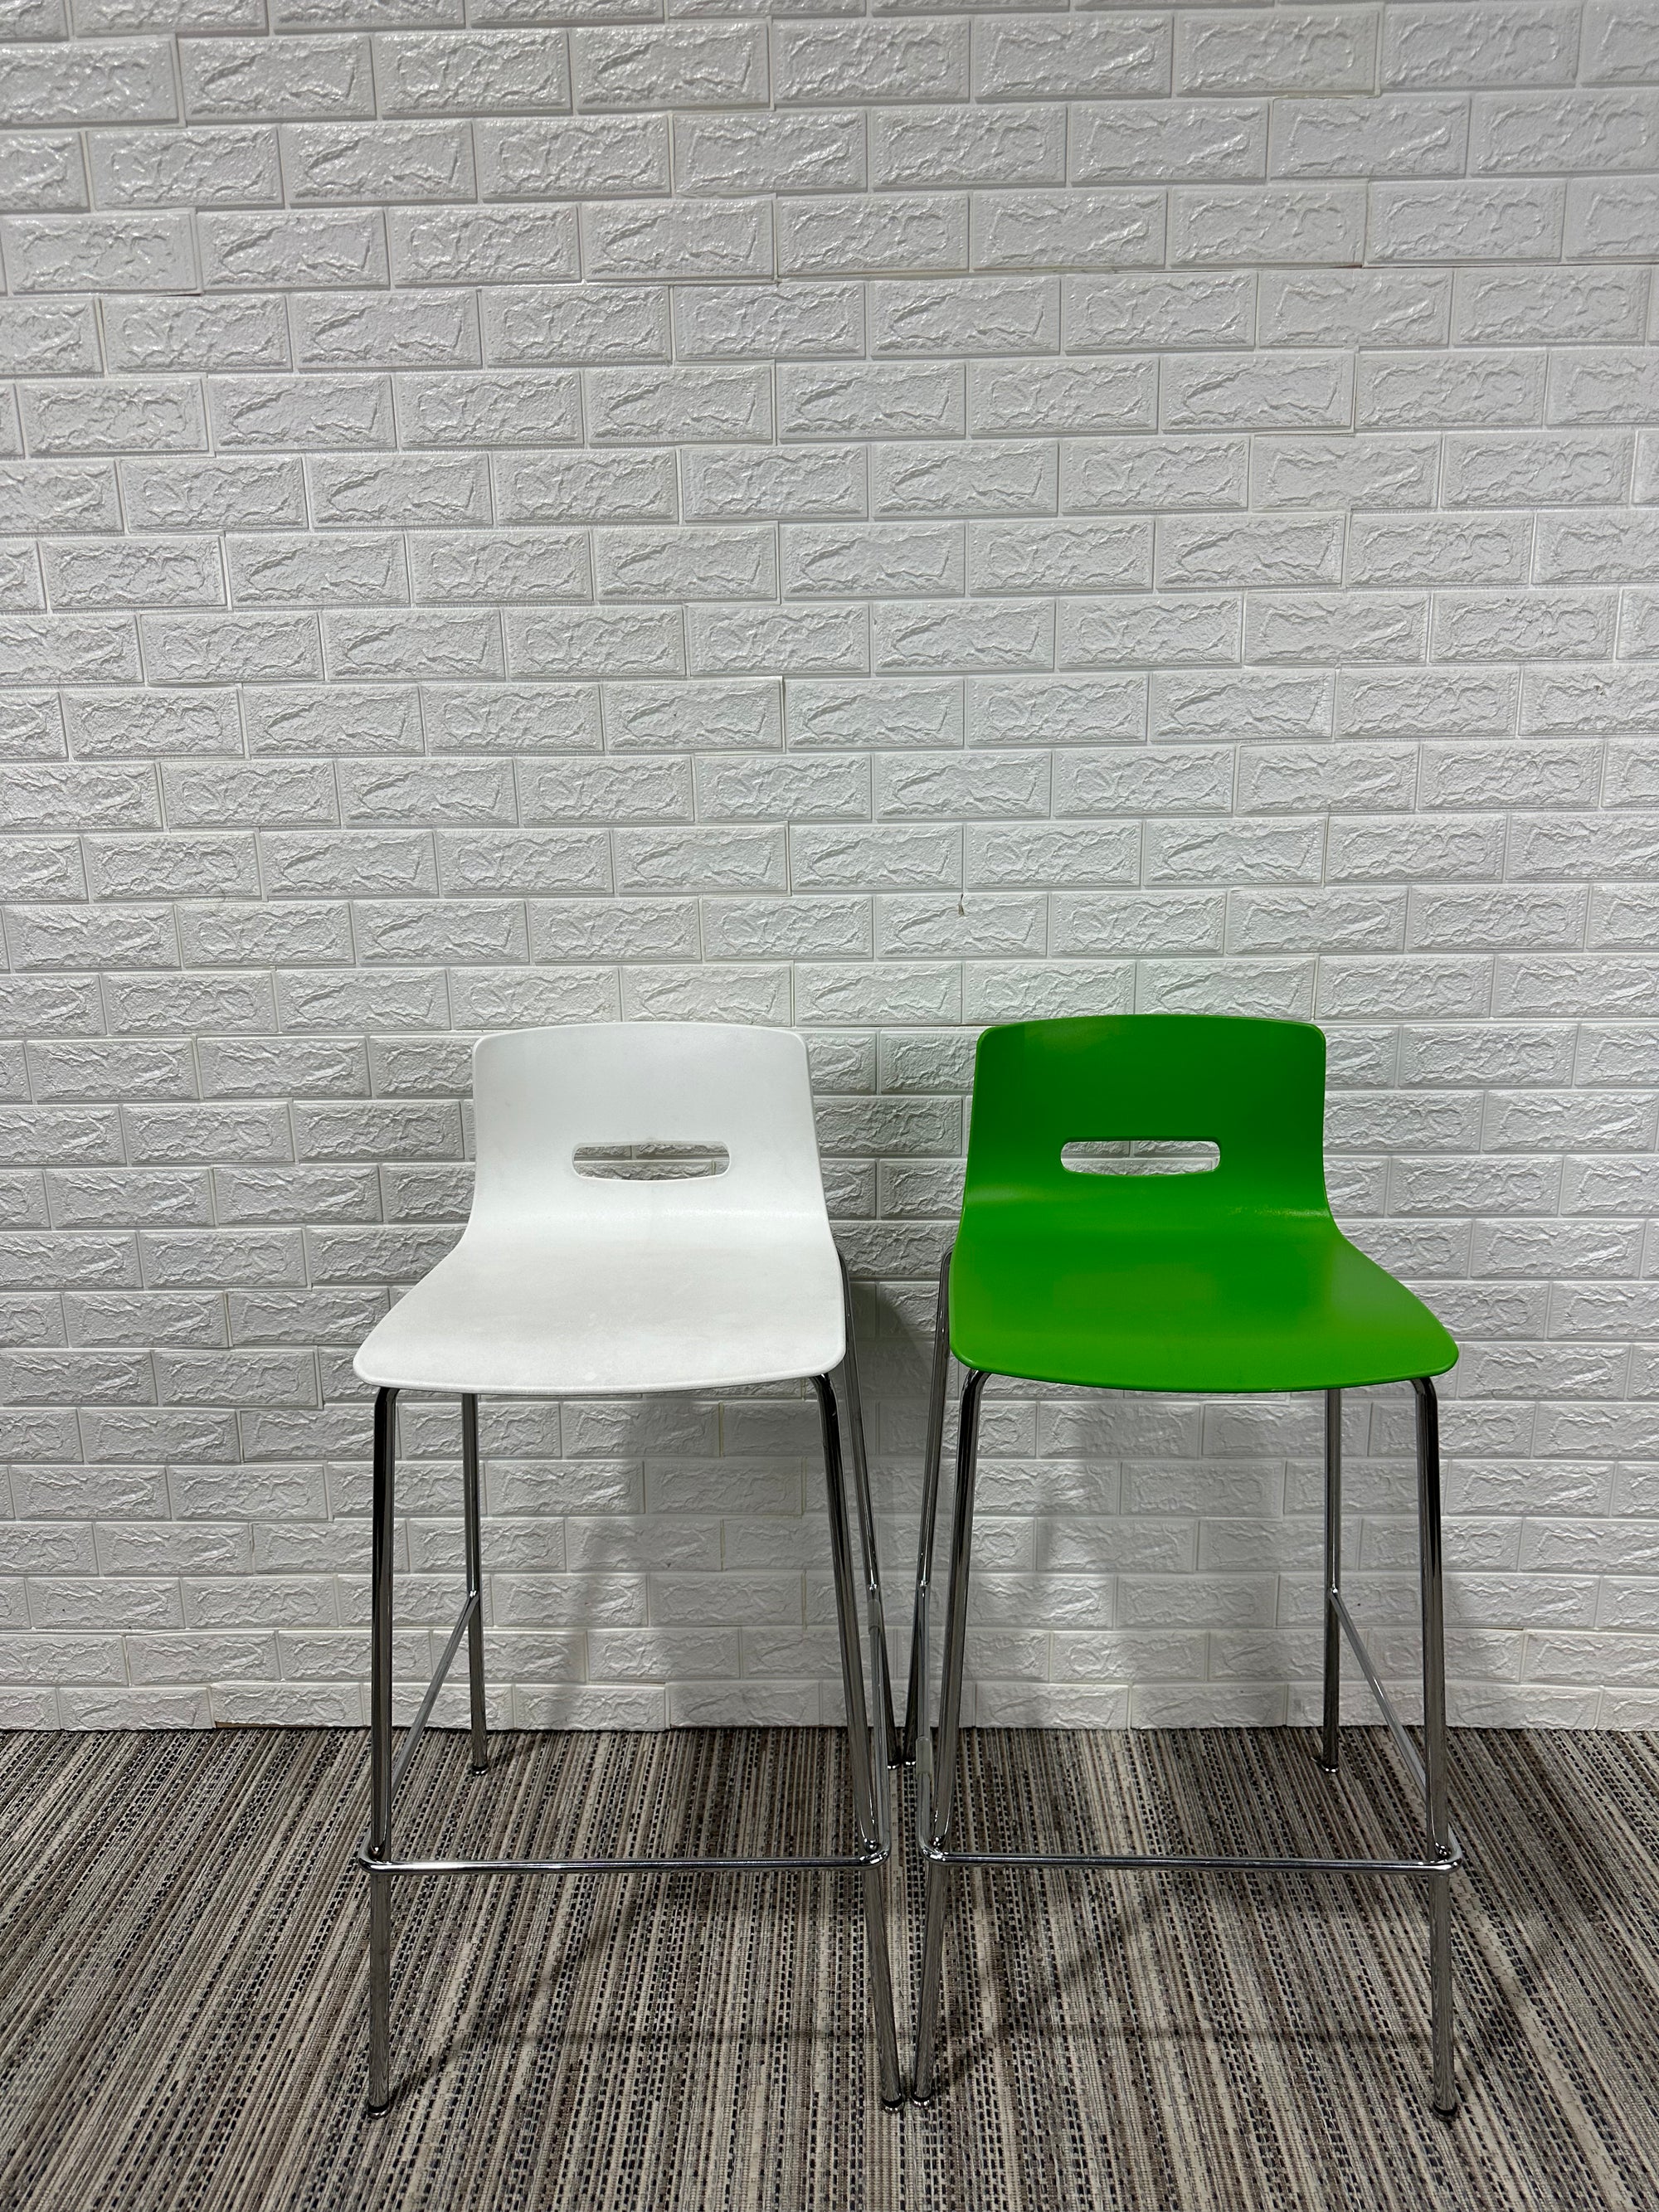 Pre-Owned Allermuir Bar Stools - Duckys Office Furniture